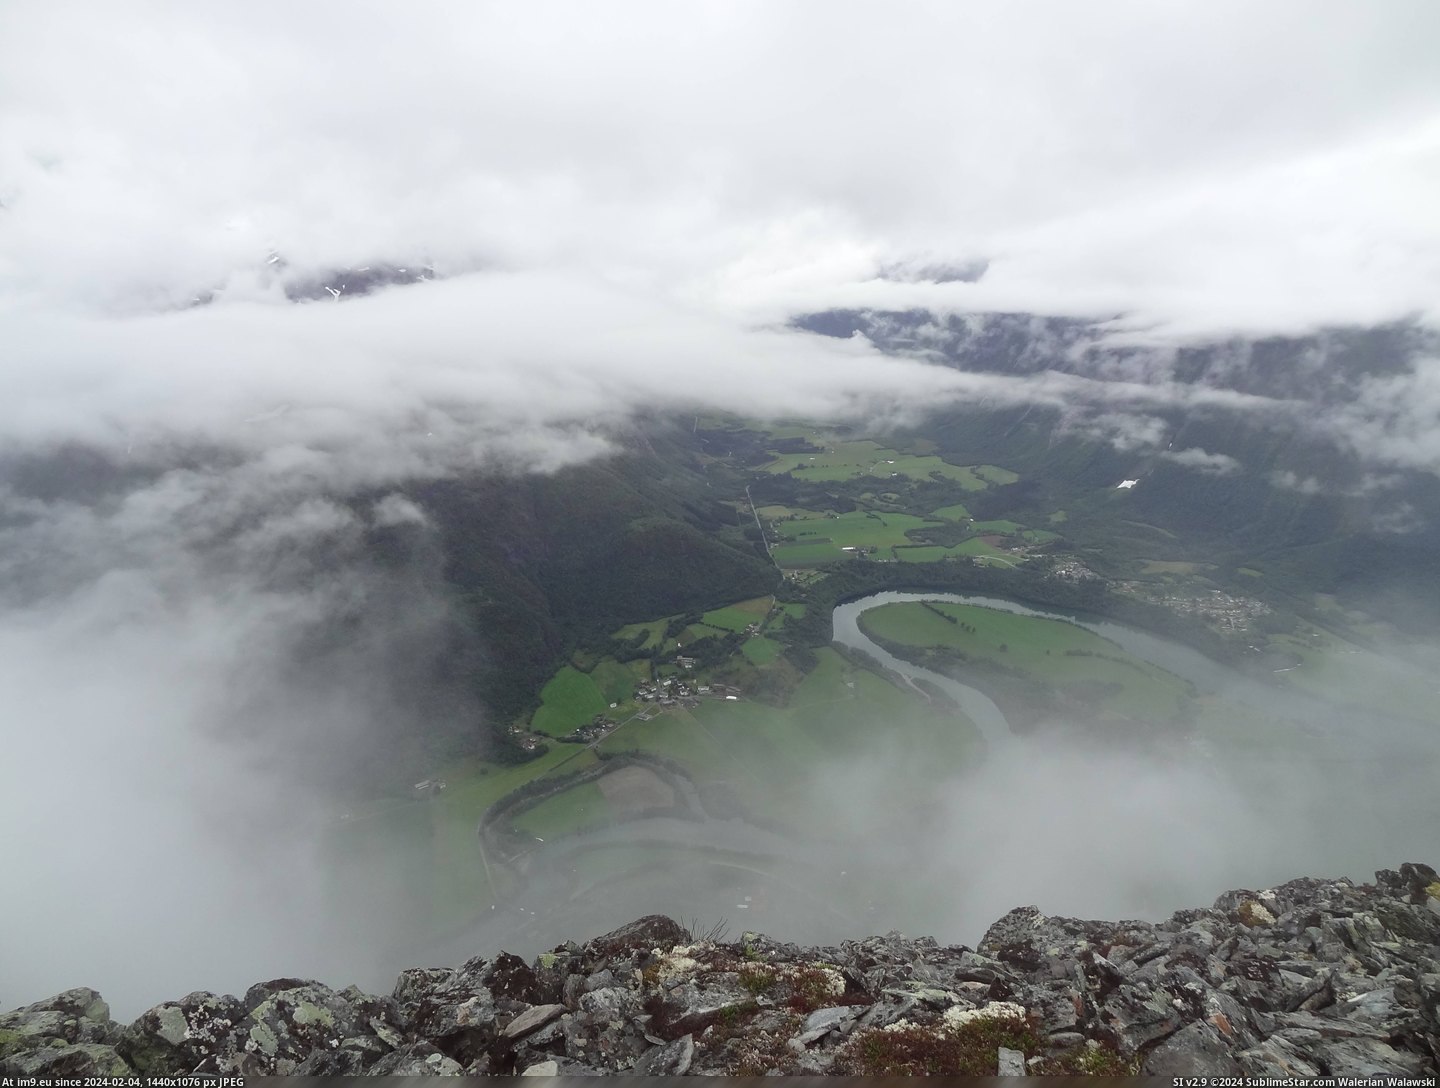 #Valley #4608x3456 #Ridge #Clouds [Earthporn]  Looking through the clouds to the valley below, on the Romsdalseggen Ridge [4608x3456] Pic. (Изображение из альбом My r/EARTHPORN favs))